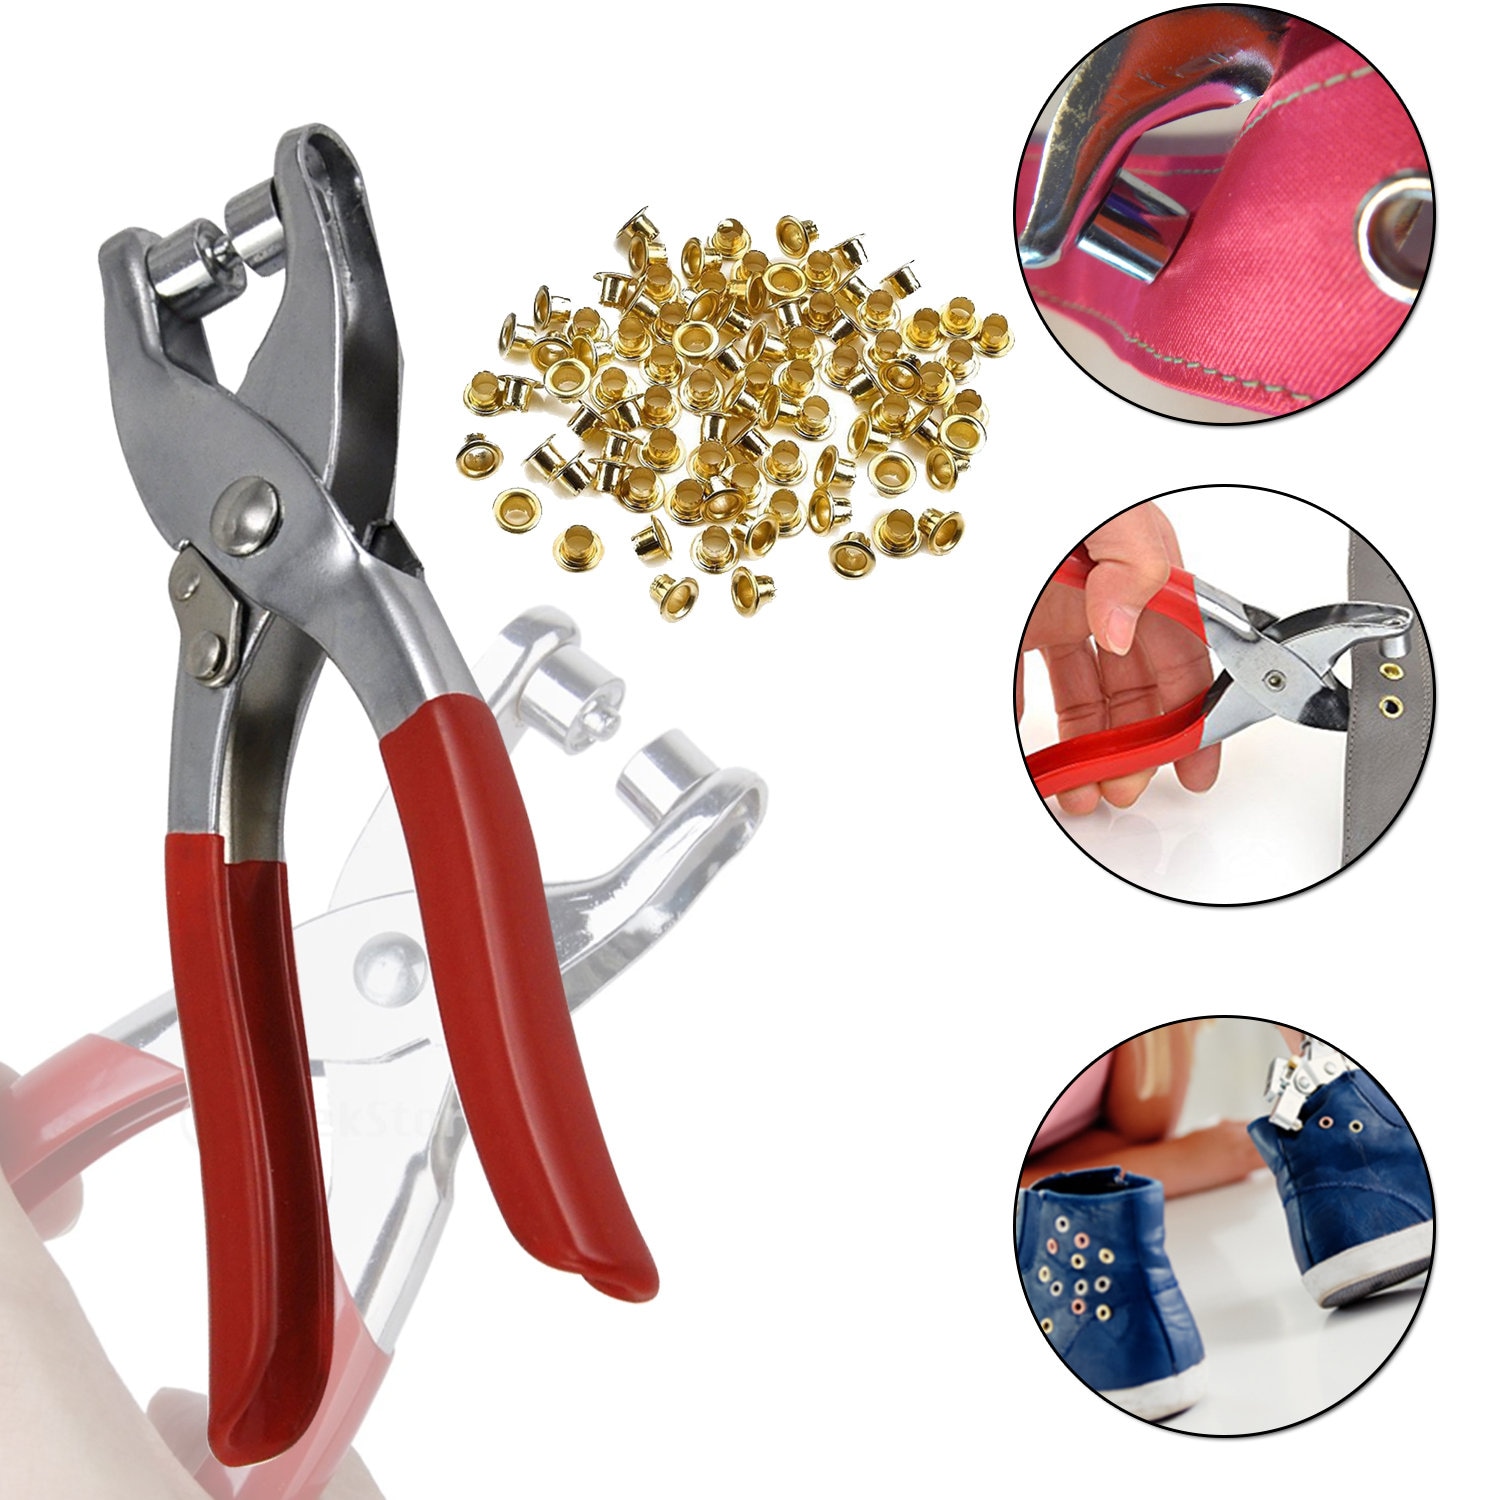 Trimming Shop 100 Set 8mm Eyelets Grommet with 3 Grommet Setting Tool  Eyelet Punch Kit for Leather, Fabric, Shoes, Handbag, Purses, Repair  Clothing